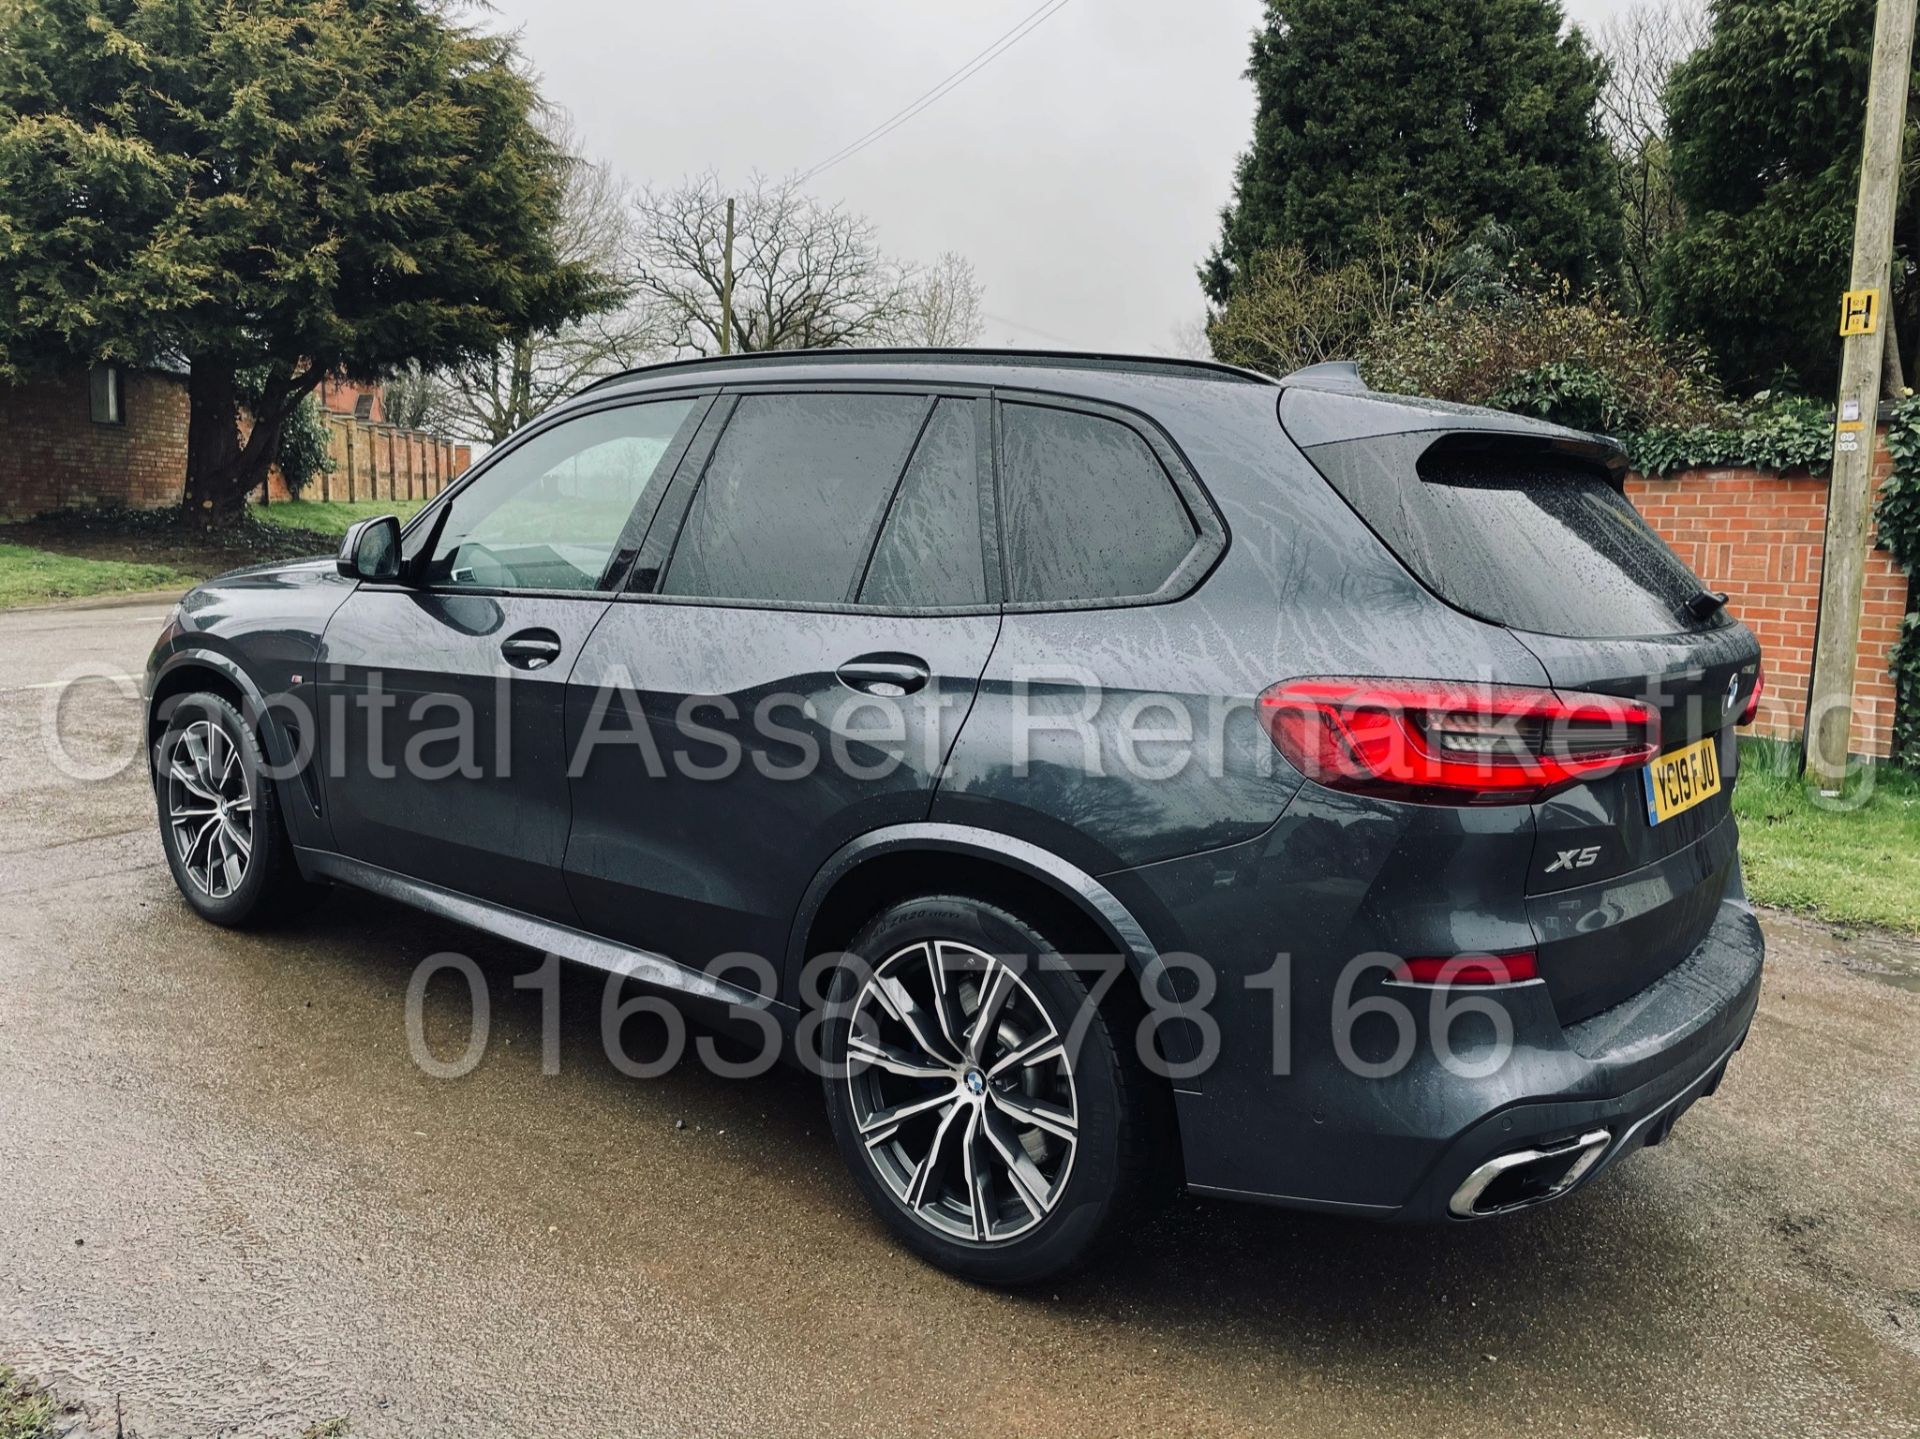 (On Sale) BMW X5 *M SPORT* X-DRIVE *7 SEATER SUV* (2019 - EURO 6) '3.0 DIESEL - AUTO' *PAN ROOF* - Image 9 of 70